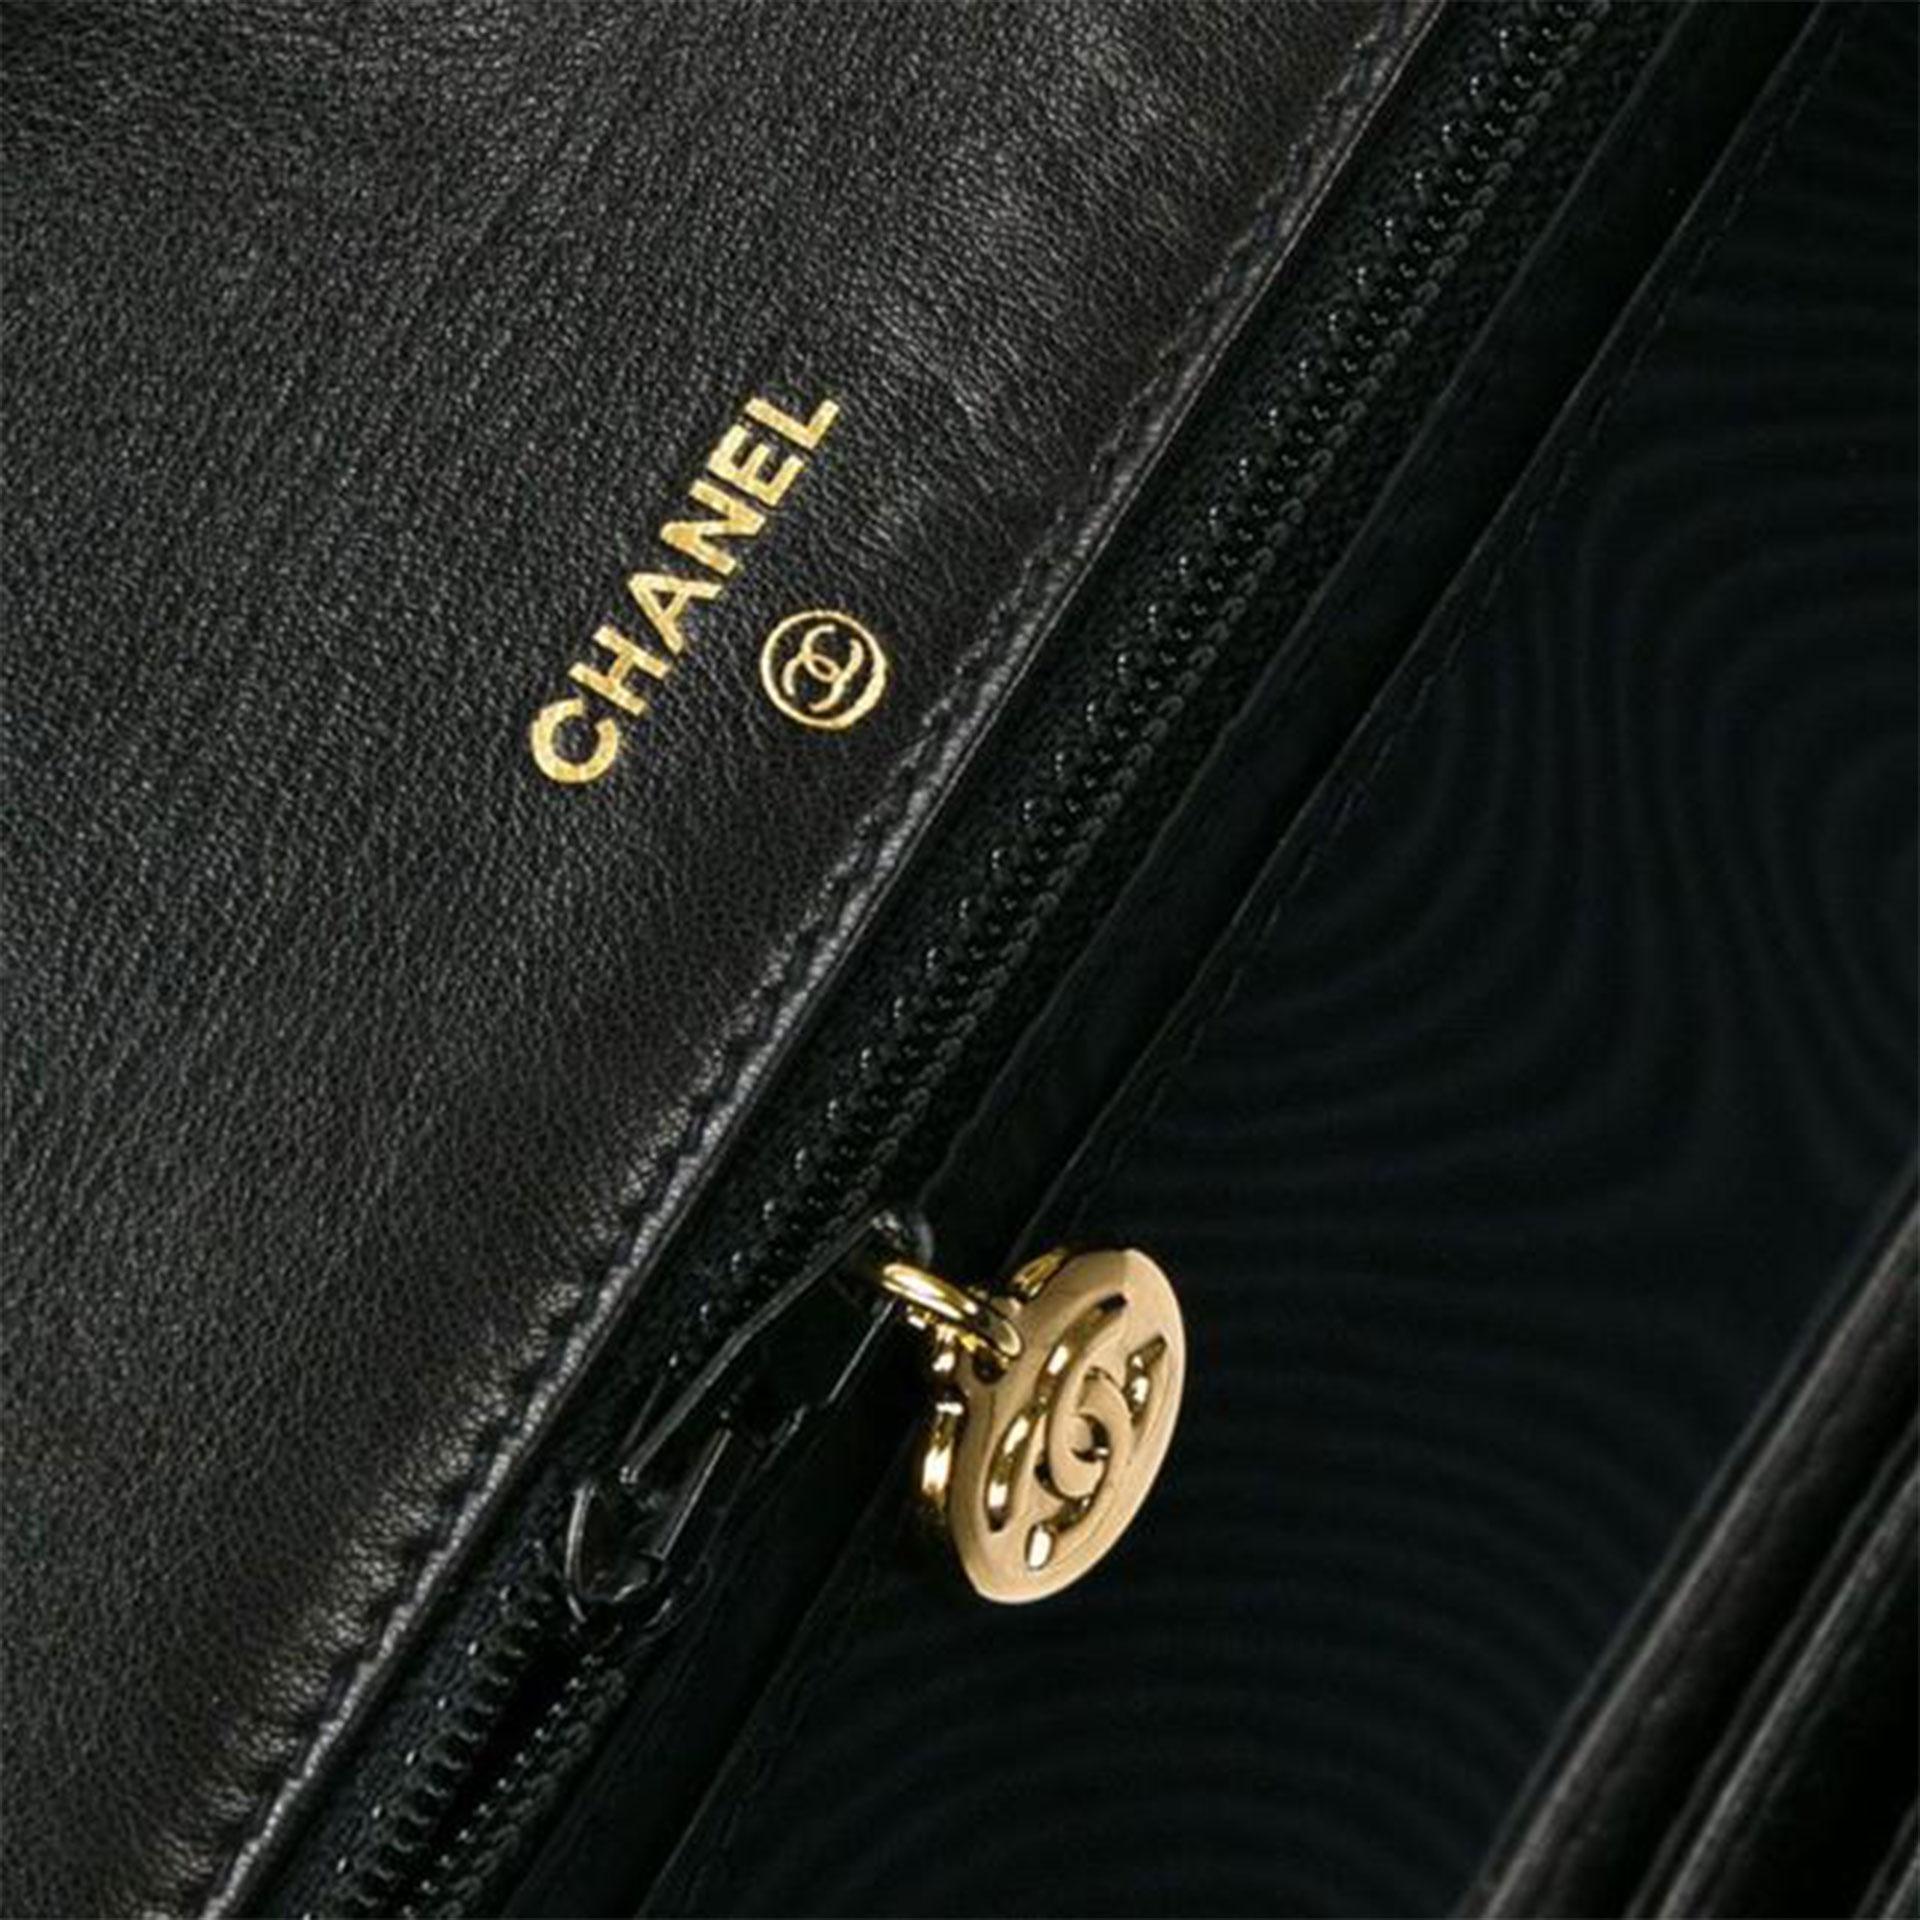 Chanel 1996 Vintage Woc Wallet On A Chain Black Calfskin Leather Cross Body Bag For Sale 3